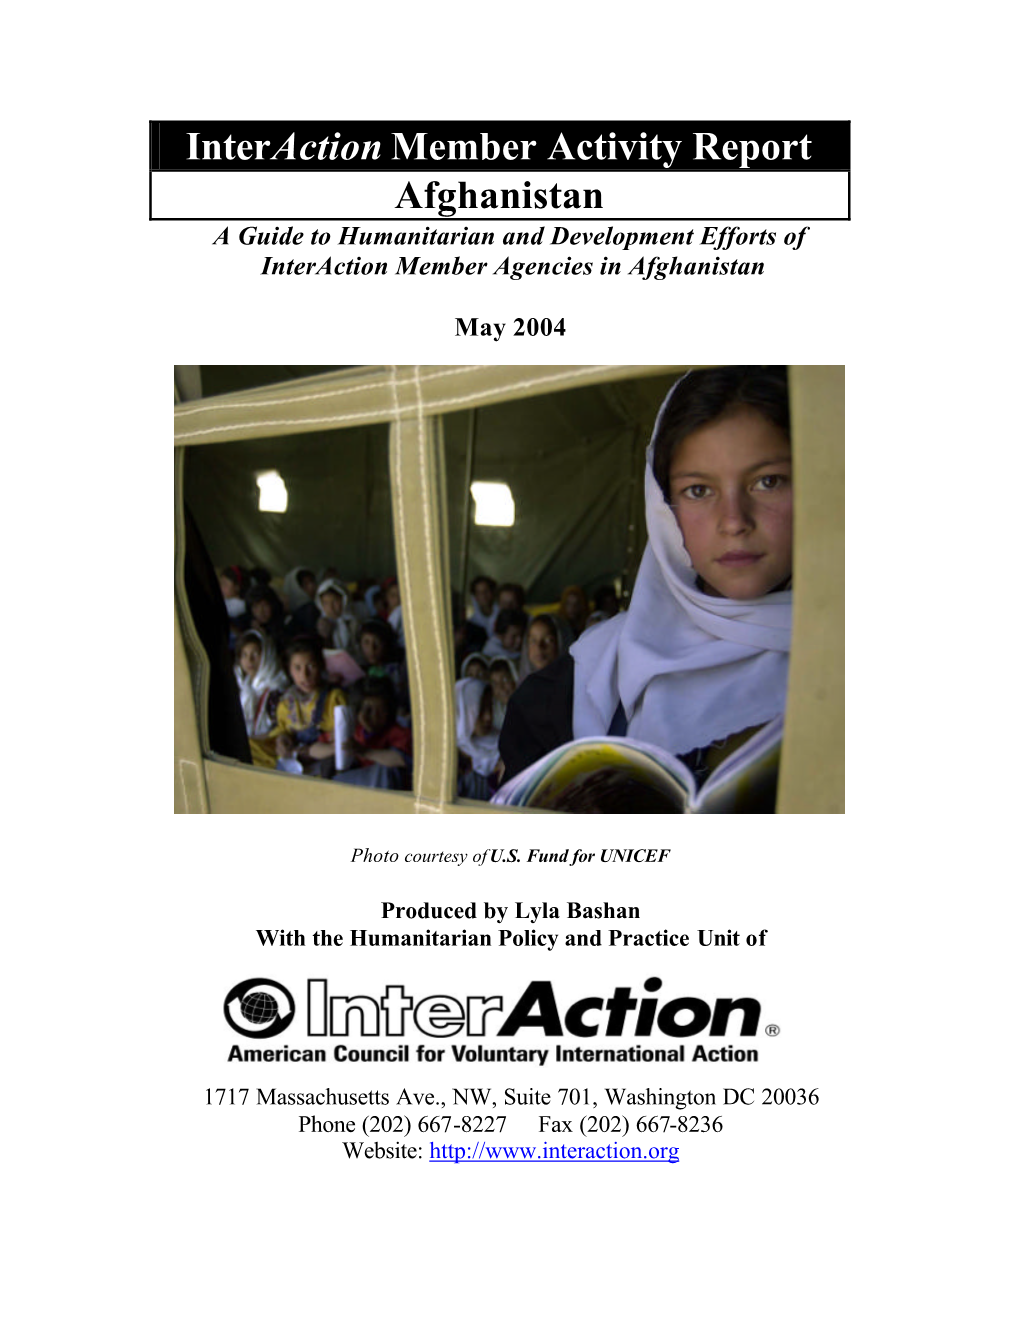 Interaction Member Activity Report Afghanistan a Guide to Humanitarian and Development Efforts of Interaction Member Agencies in Afghanistan